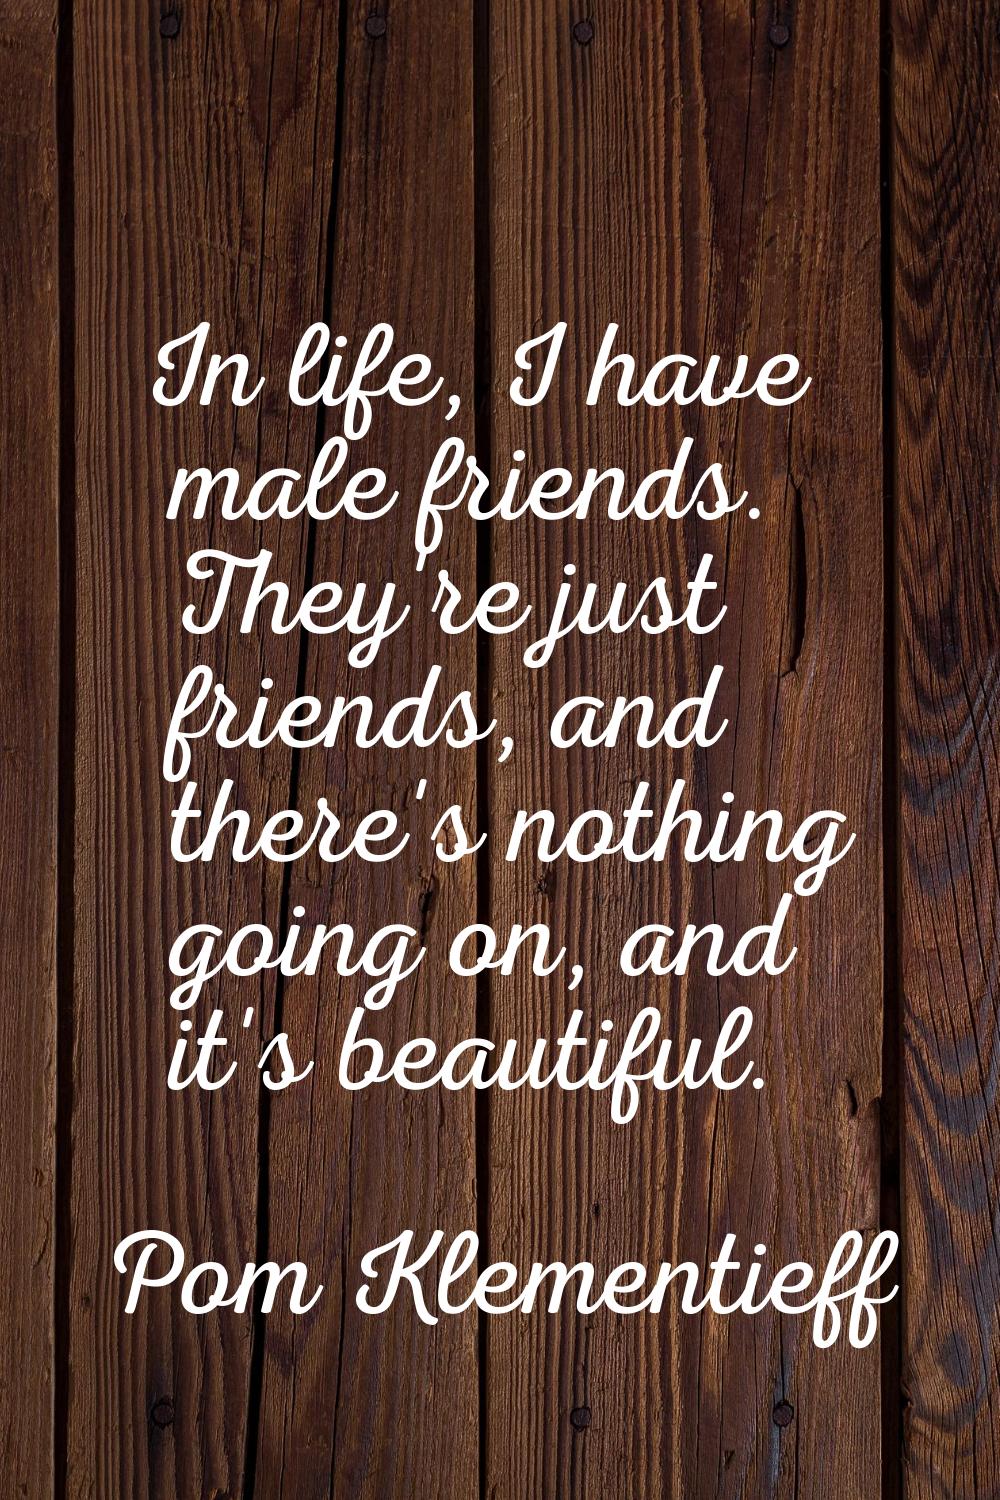 In life, I have male friends. They're just friends, and there's nothing going on, and it's beautifu